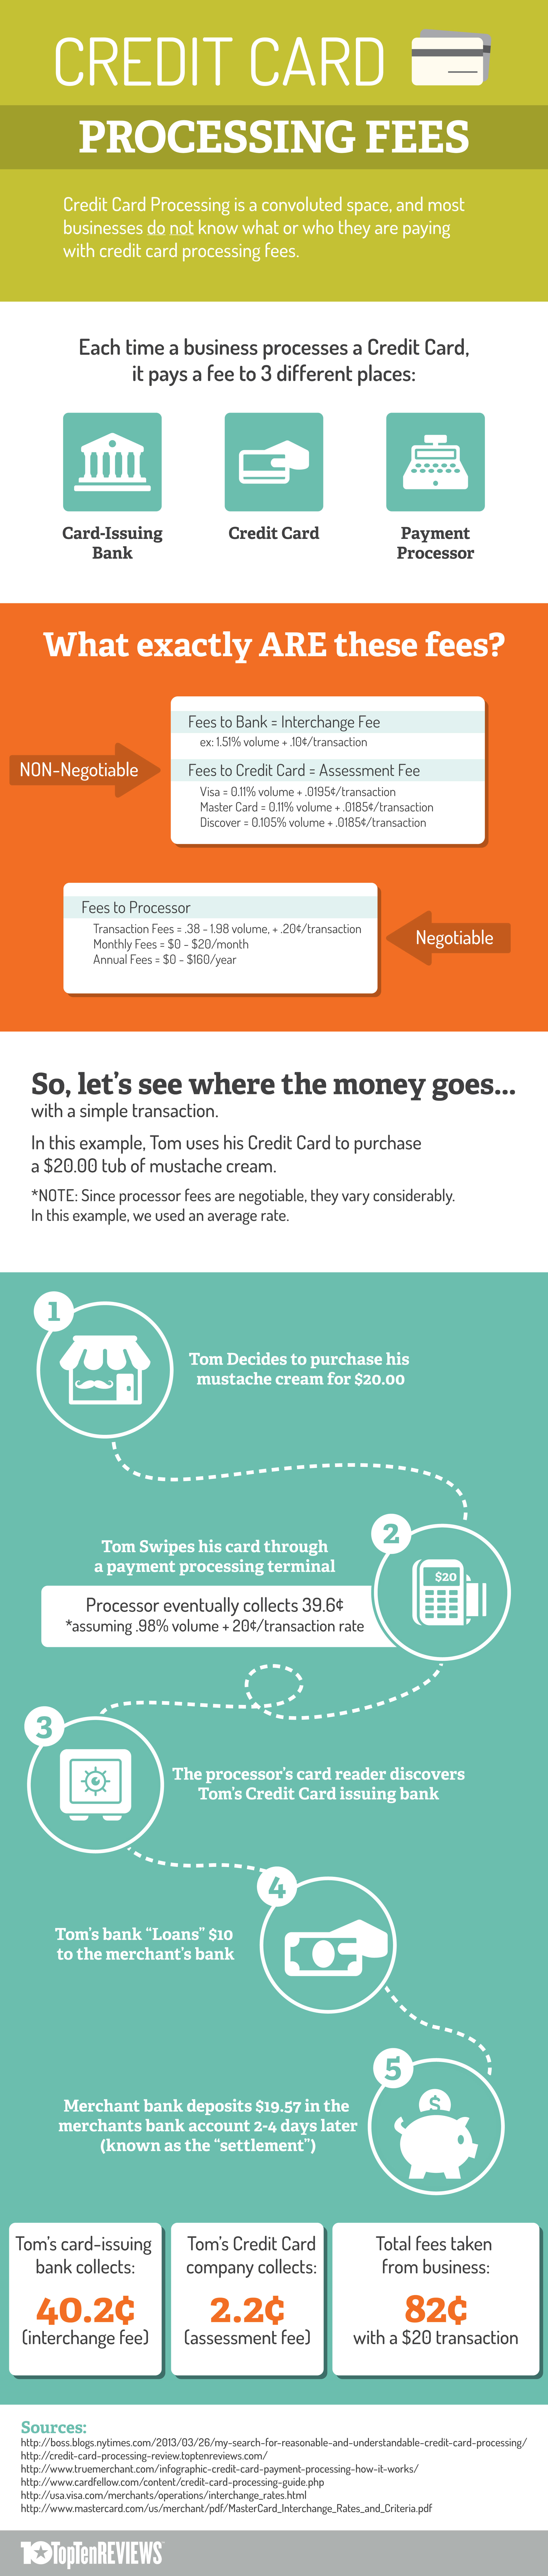 How credit card processing fees work